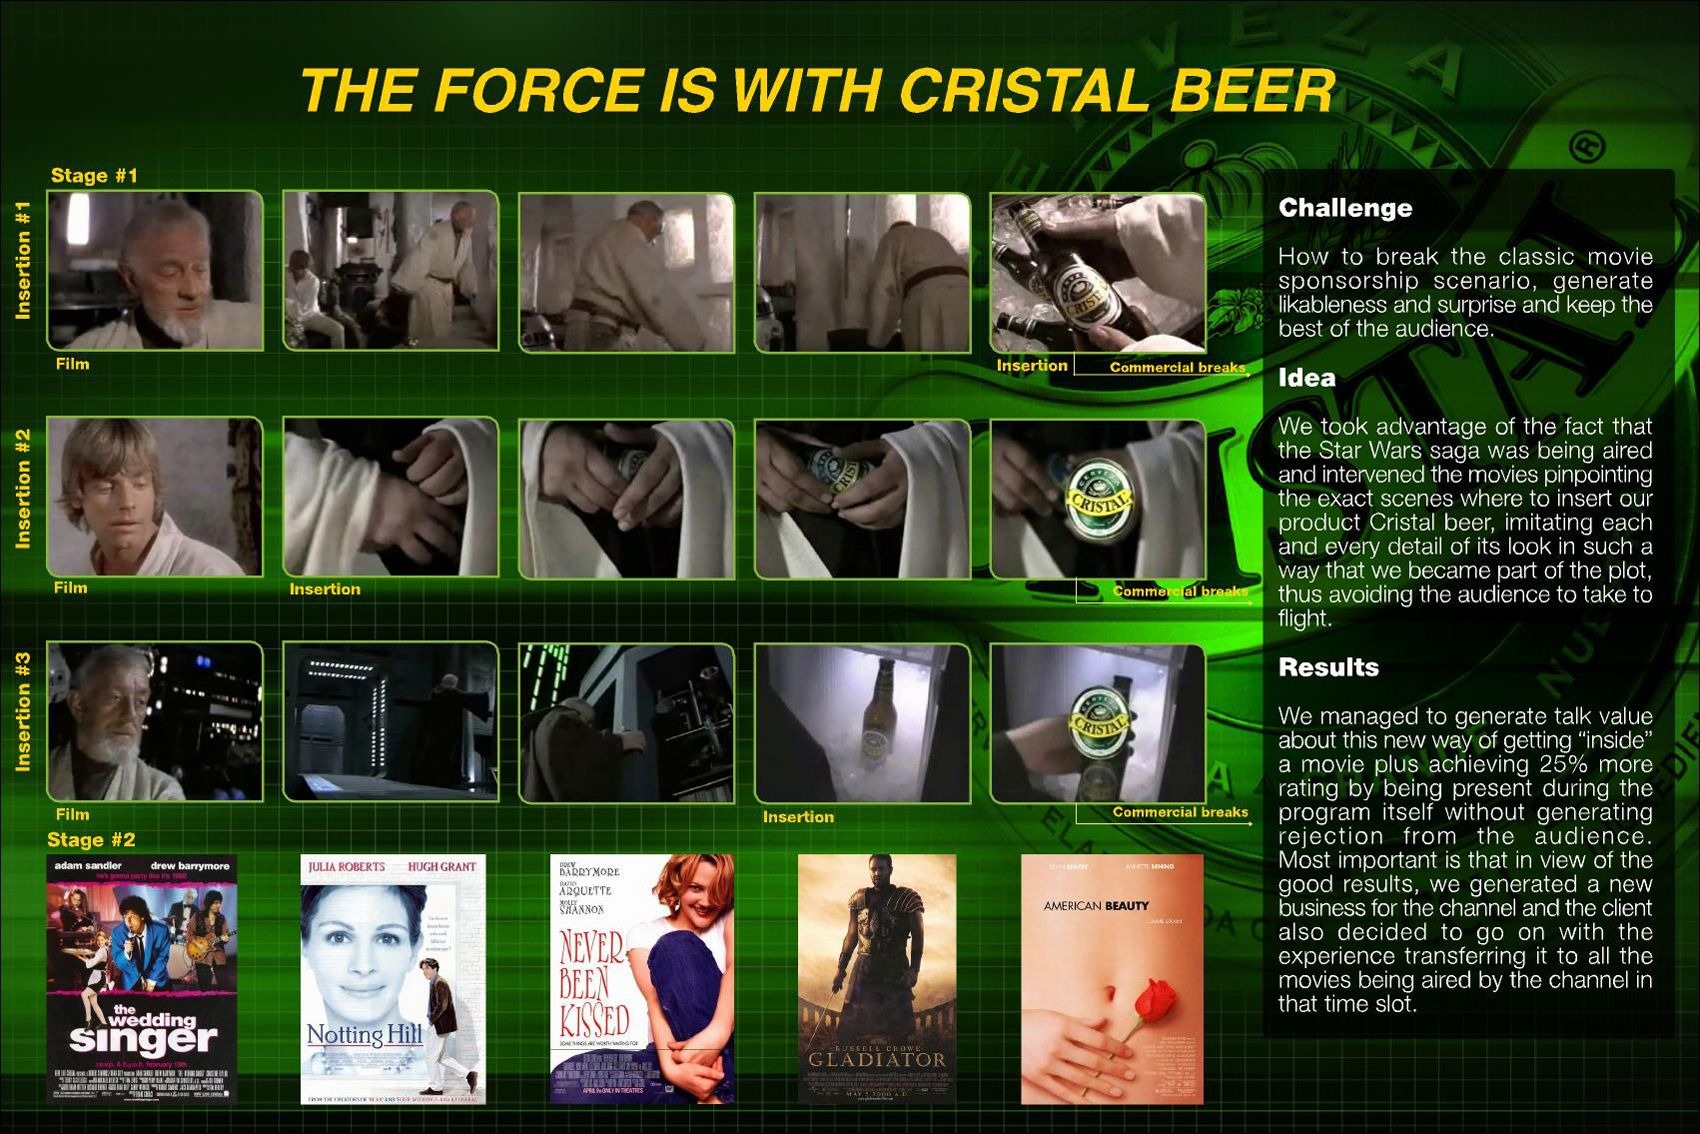 FORCE IS WITH CRISTAL BEER